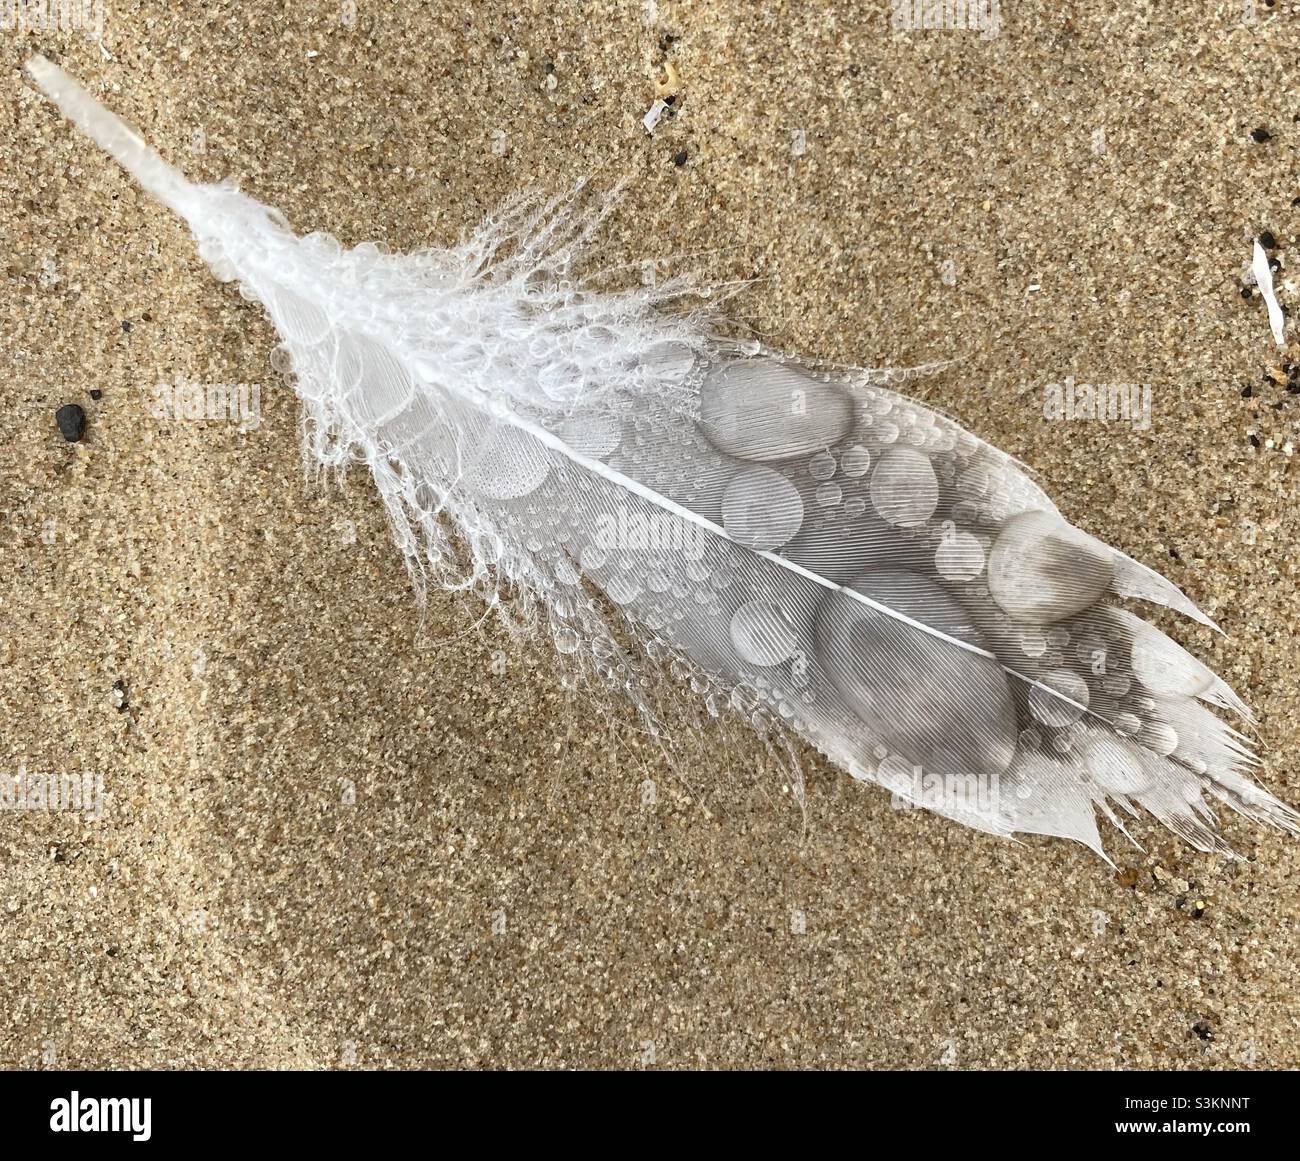 Anatomy of a Feather Stock Photo